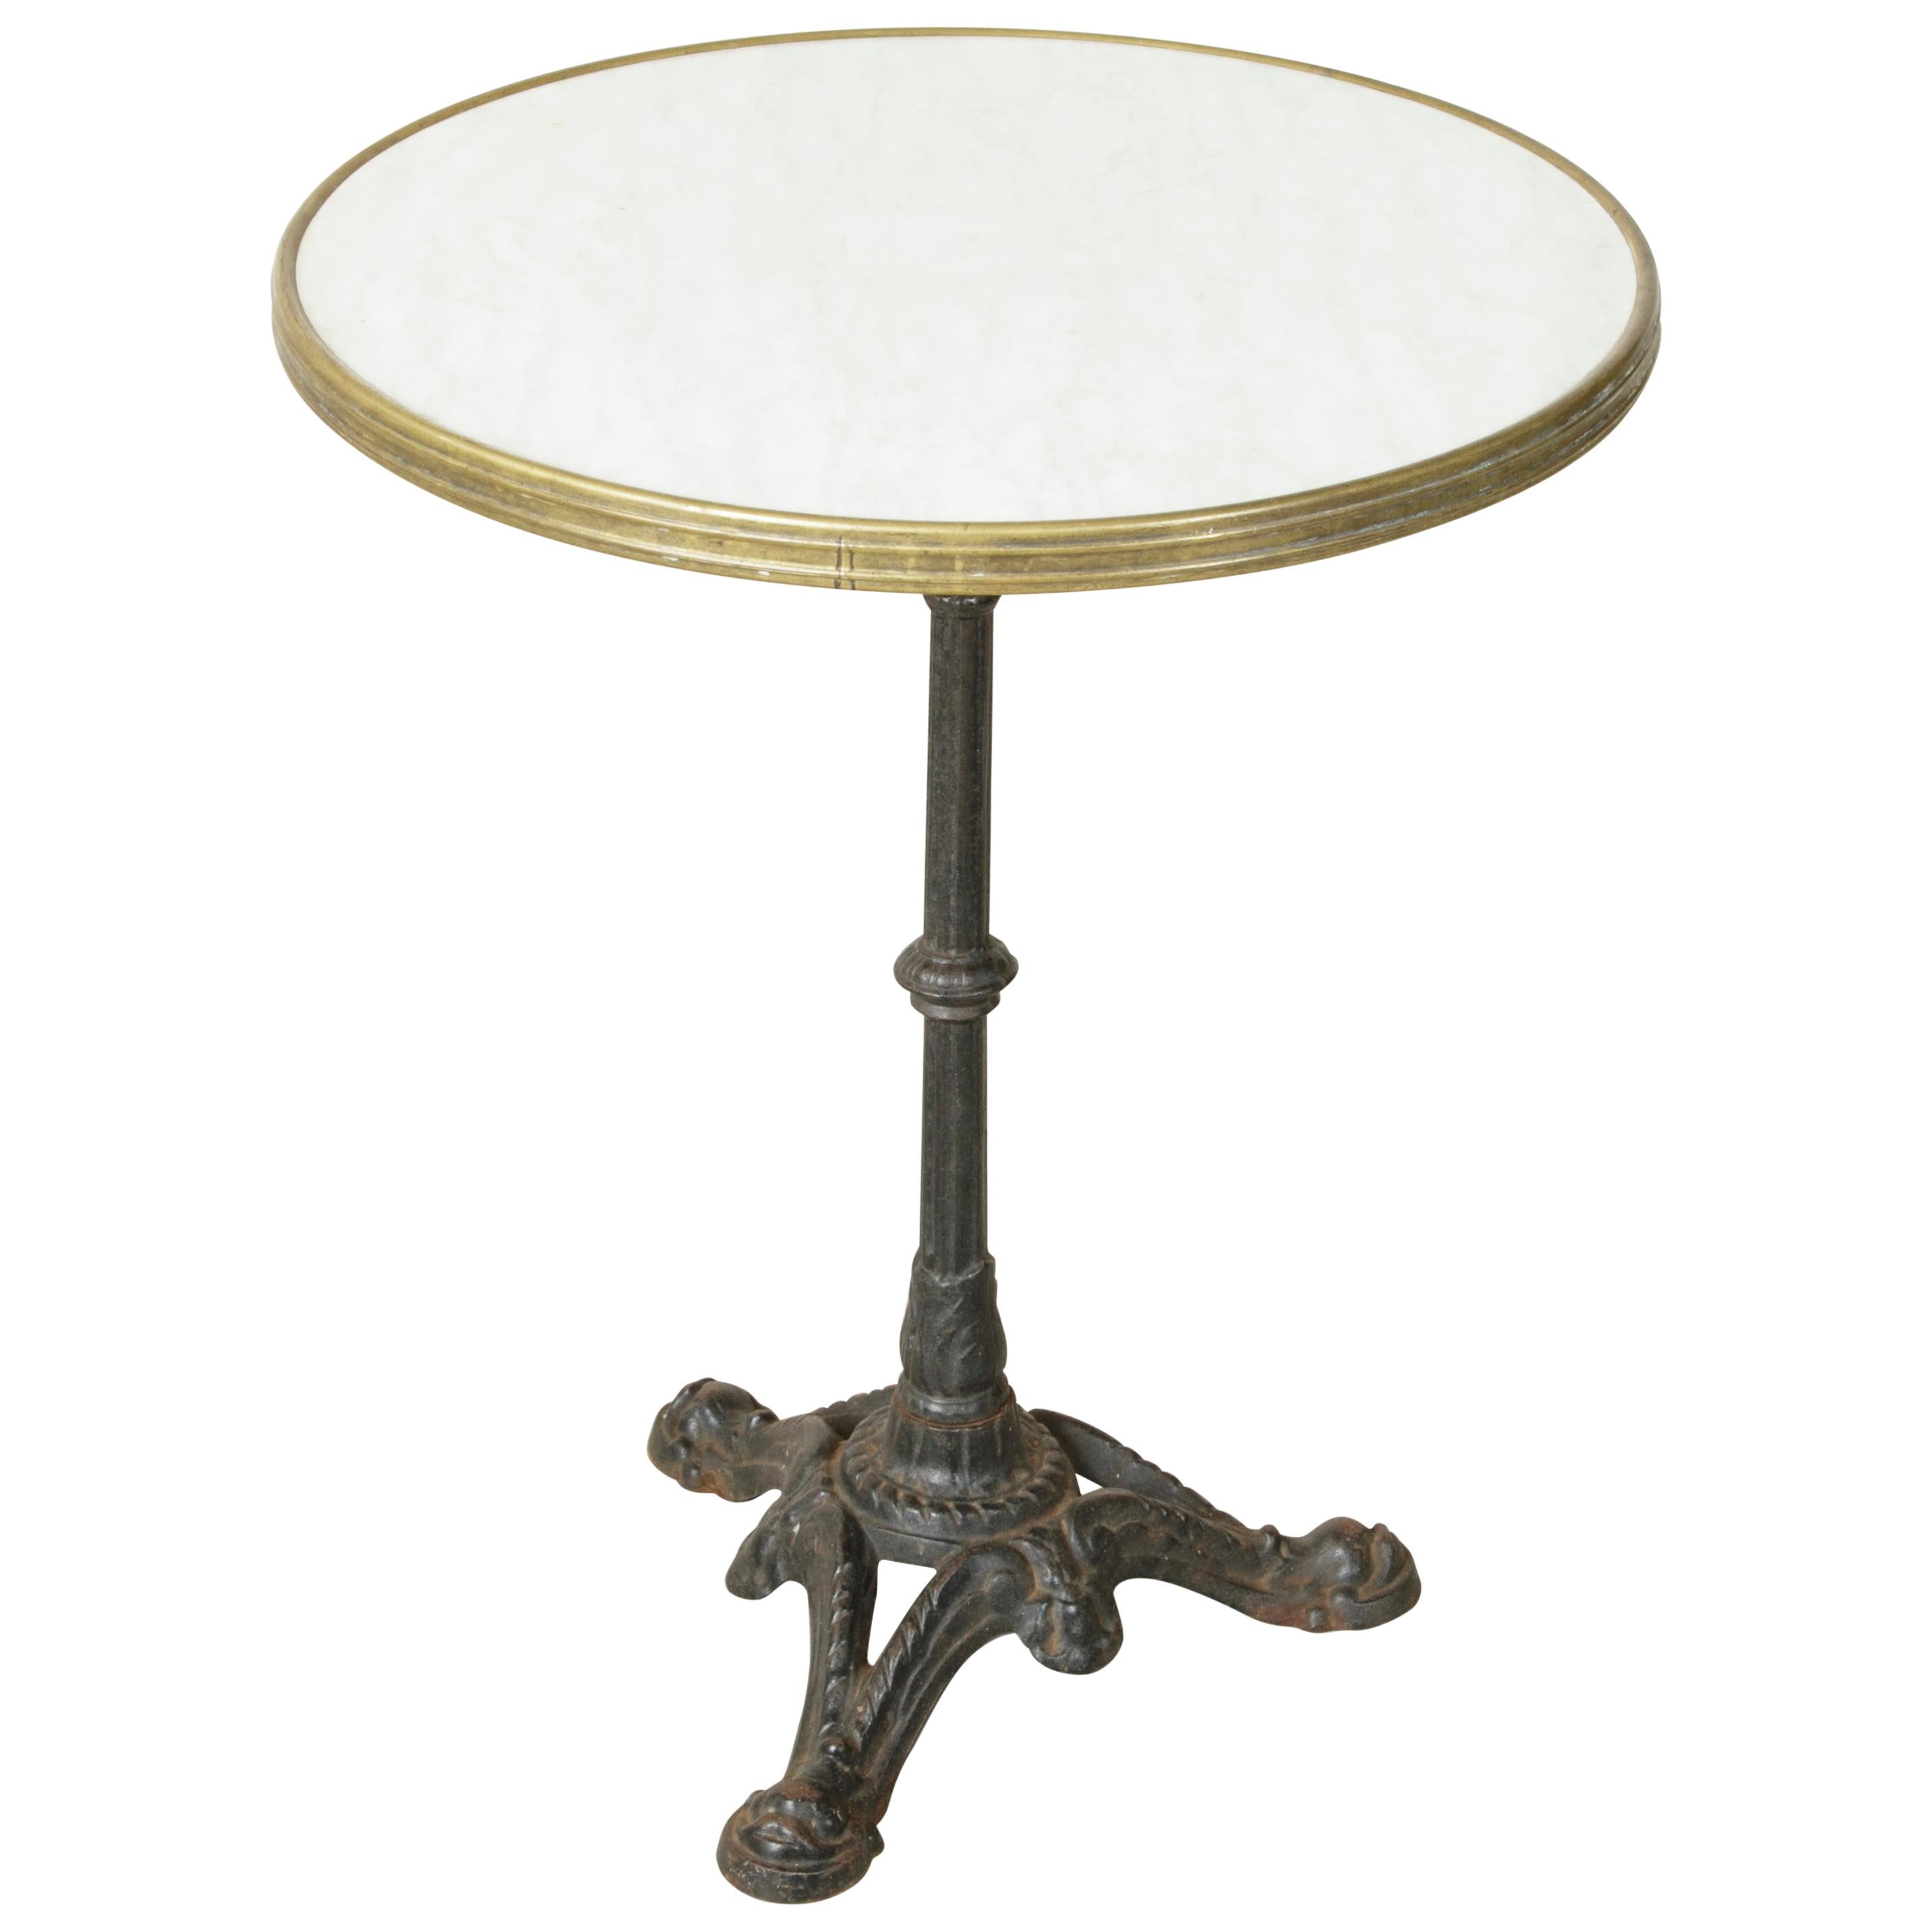 Mid-20th Century French Iron Bistro Table with Faux Marble-Top and Brass Trim